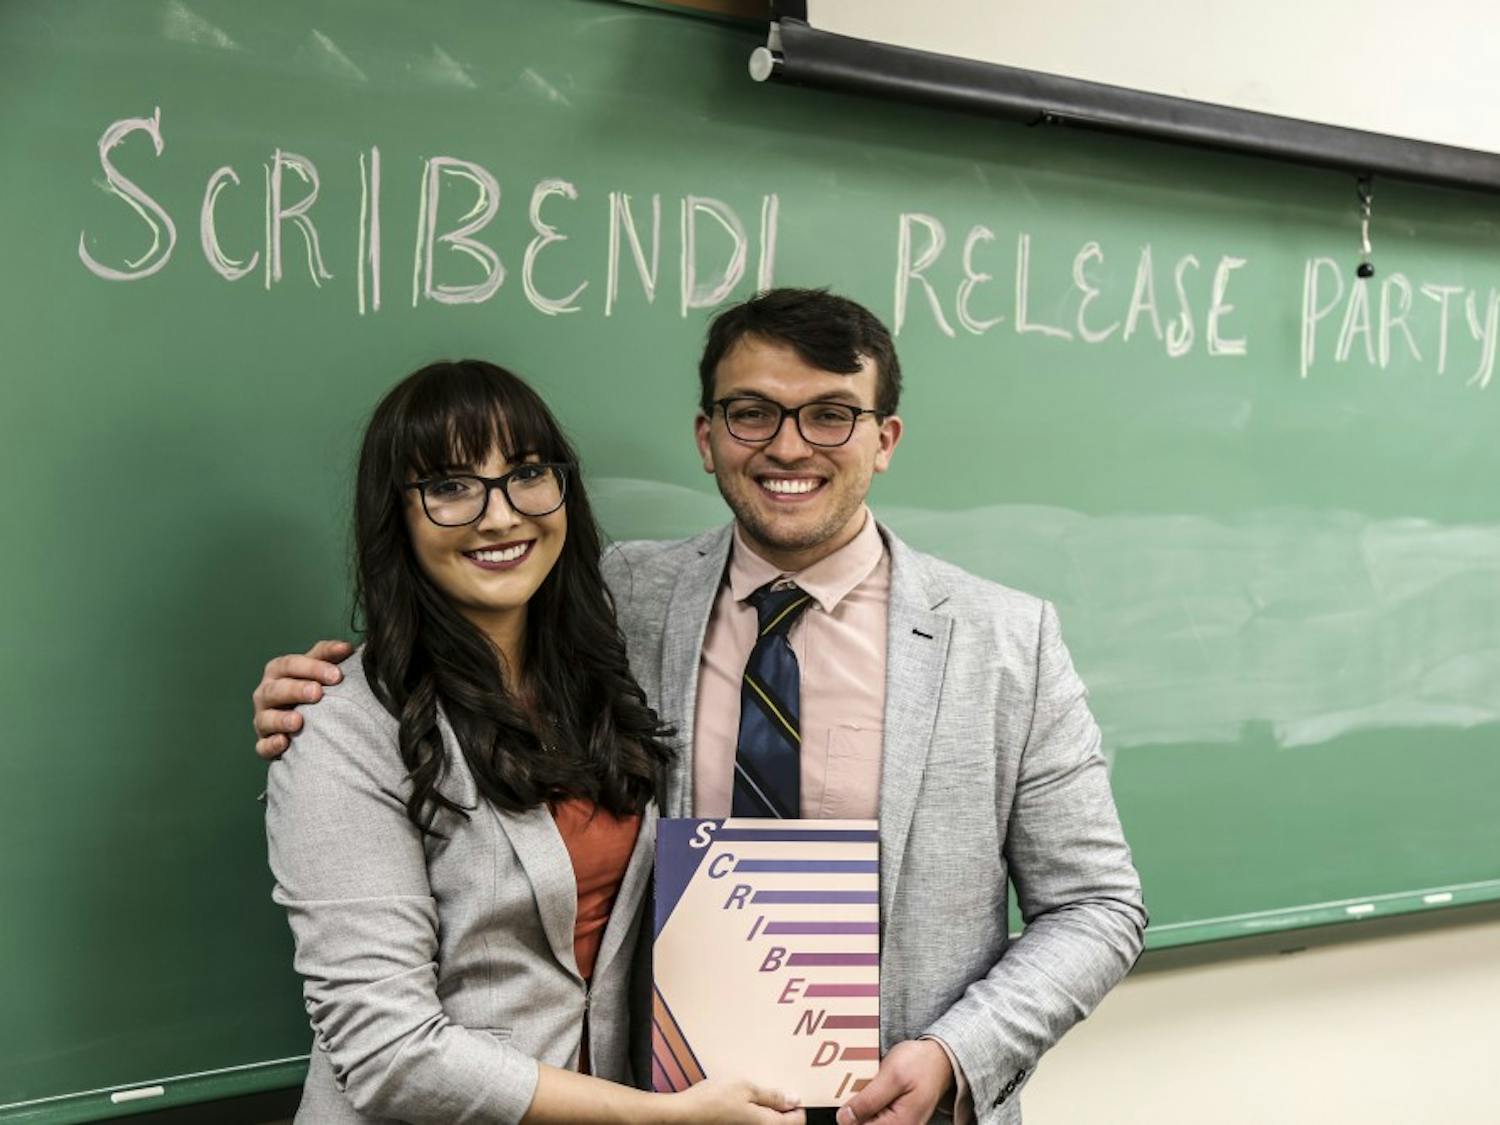 2018 Editor-in-Chief, Josh Rysanek stands next to 2019 Editor-in-Chief, Alyssa Aragon during the Scribendi release party on April 28, 2018.